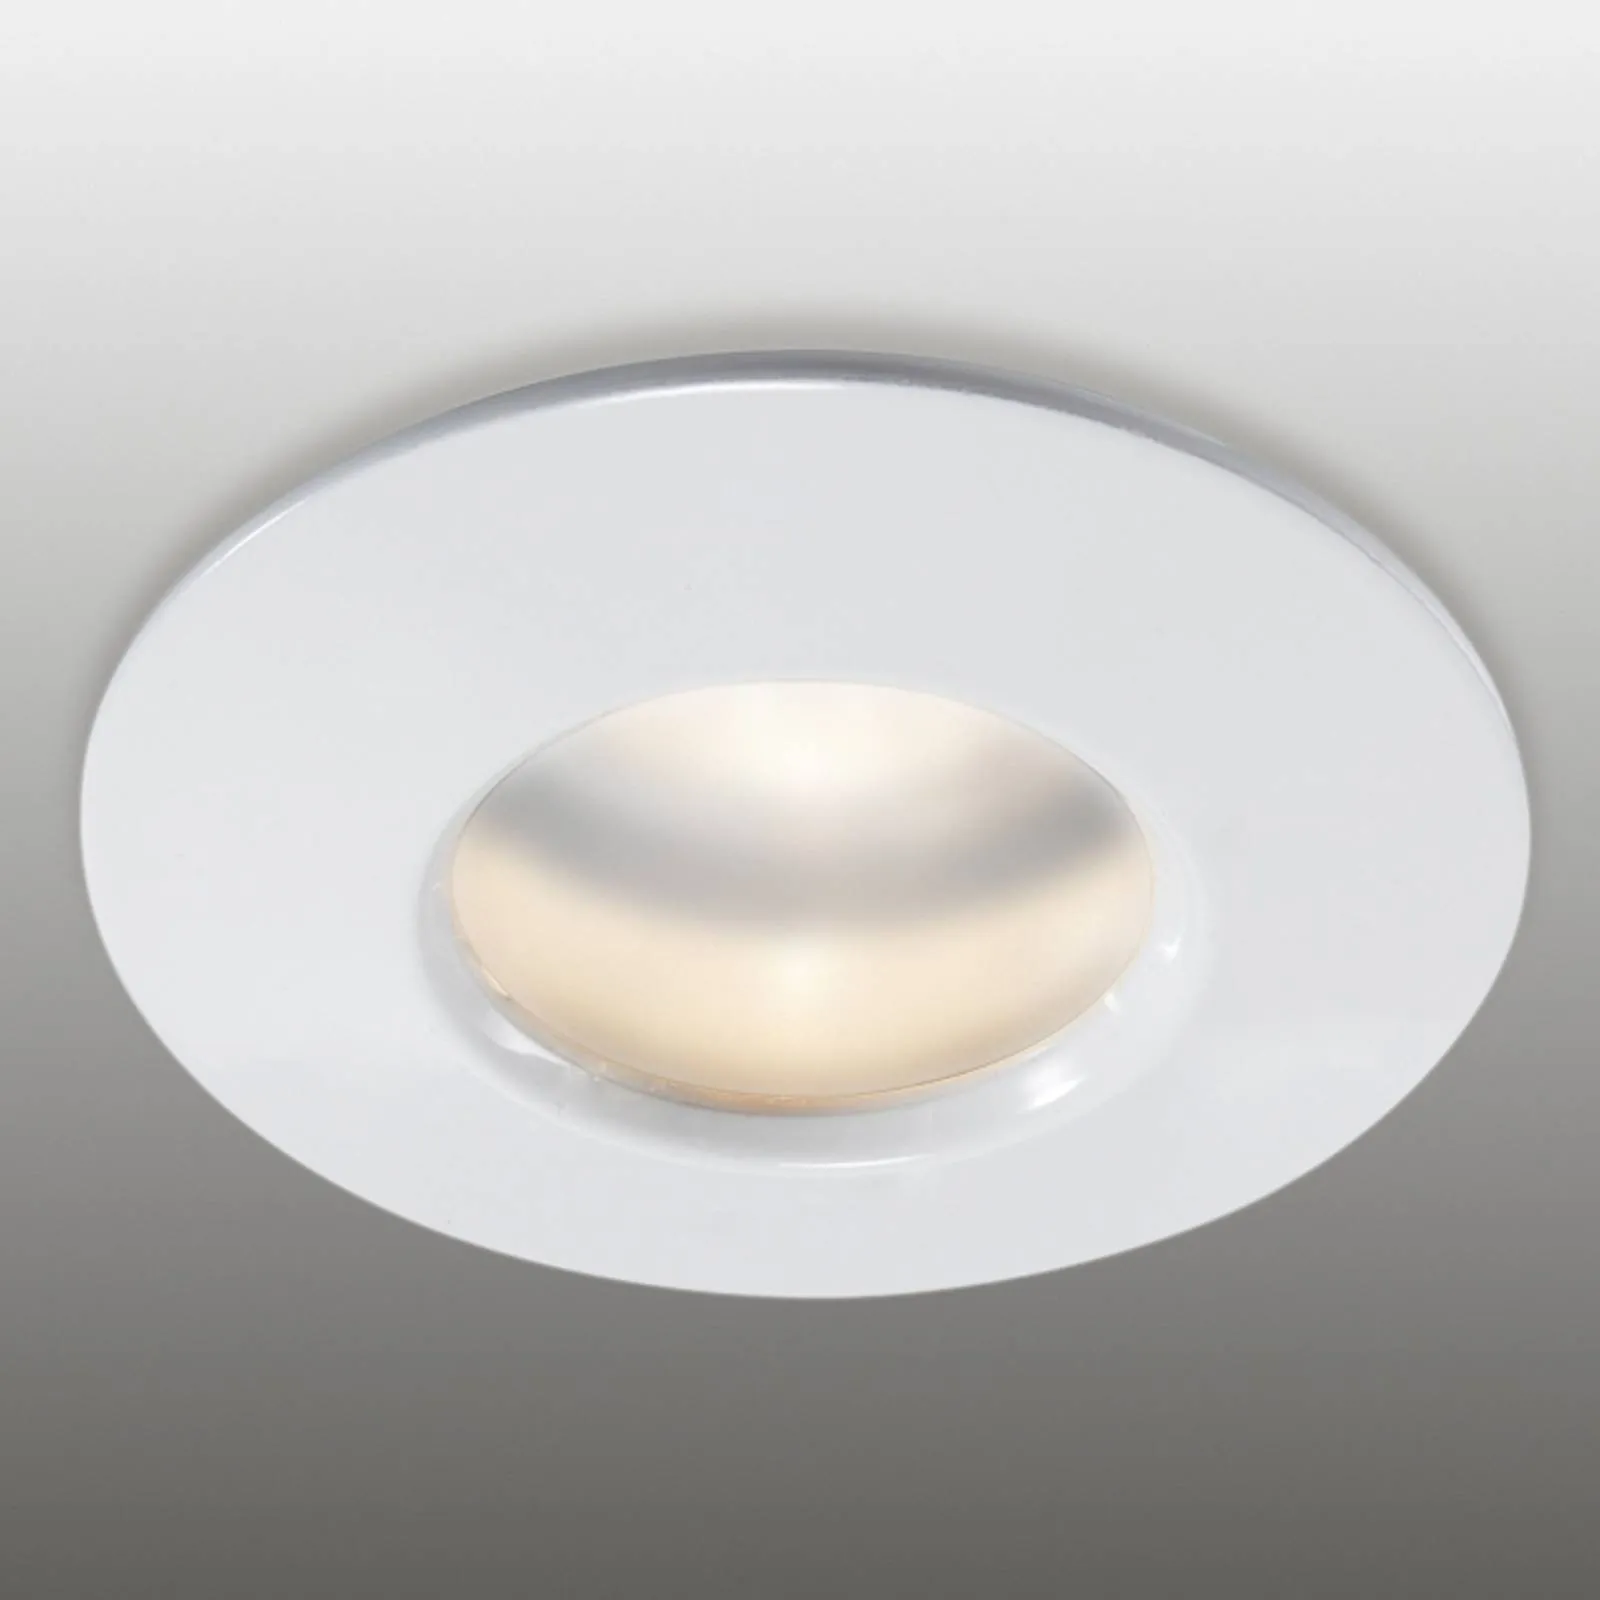 Fixed recessed light, white